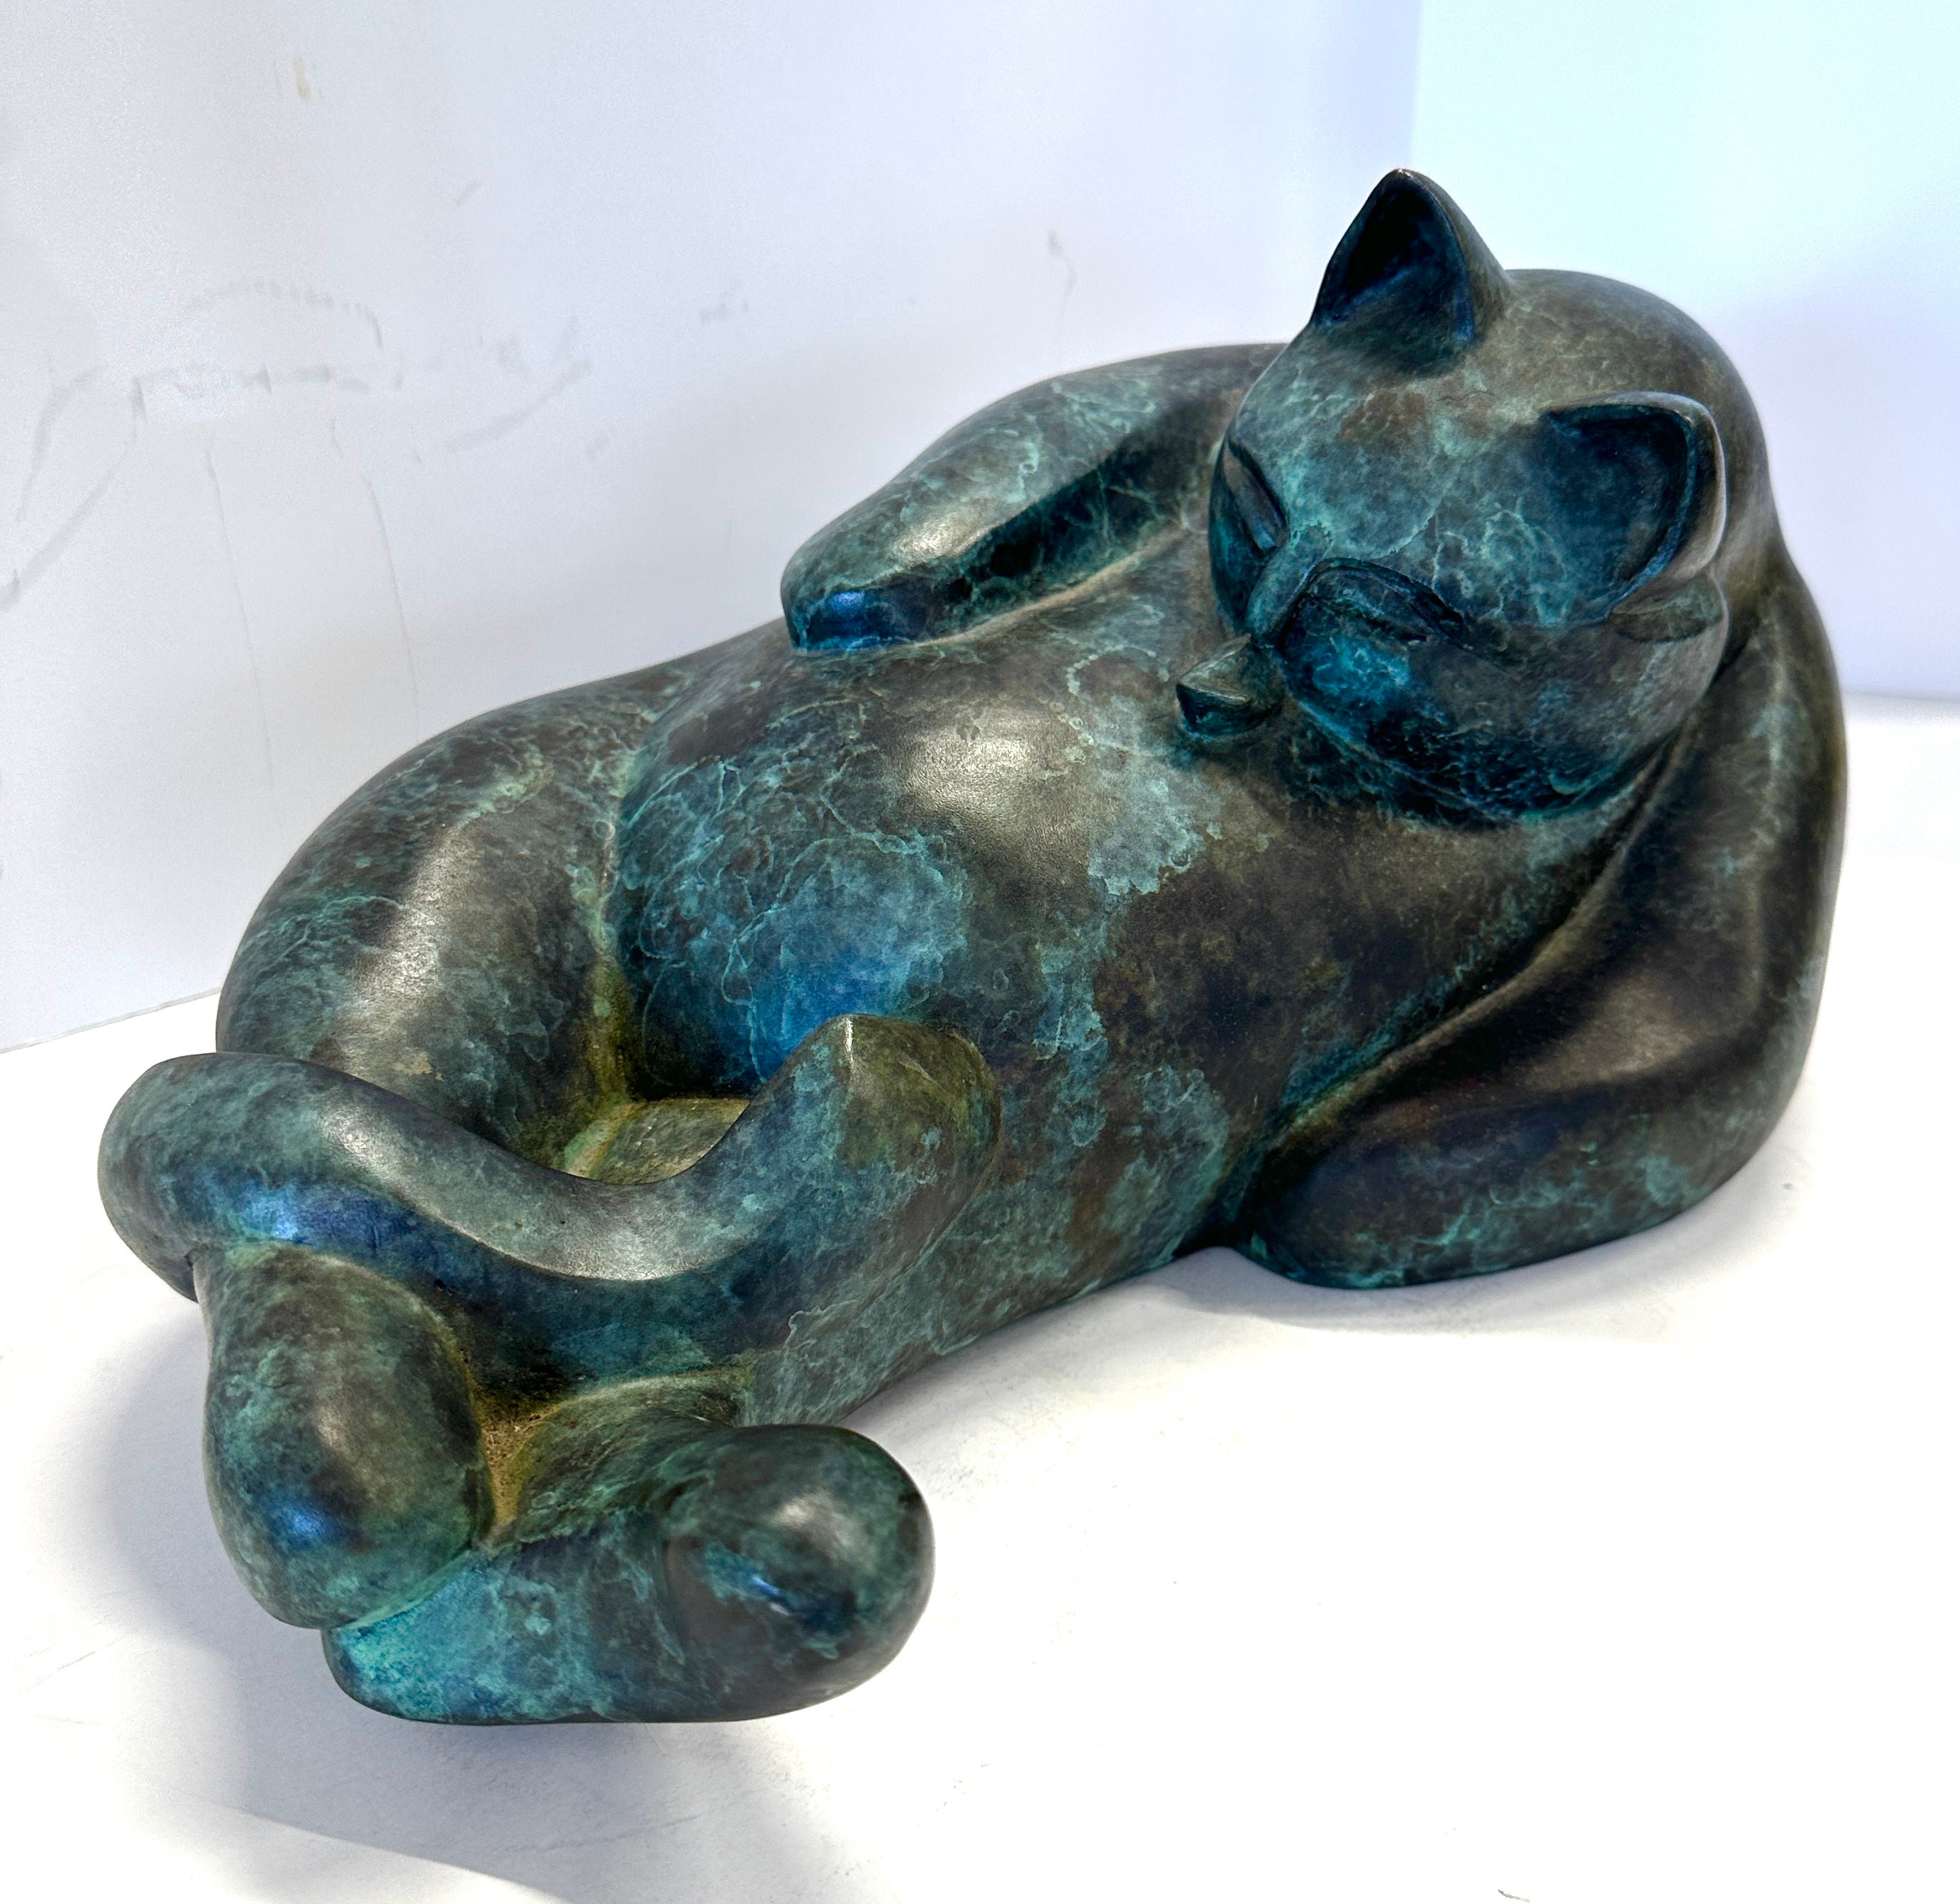 A wonderful bronze cat by the noted California artist Barbara Beretich. It is titled Tanko and is signed and dated underneath 9/21/96. It is numbered 6/24. It has developed a beautiful patina and is suitable for display indoors or outdoors.  It is